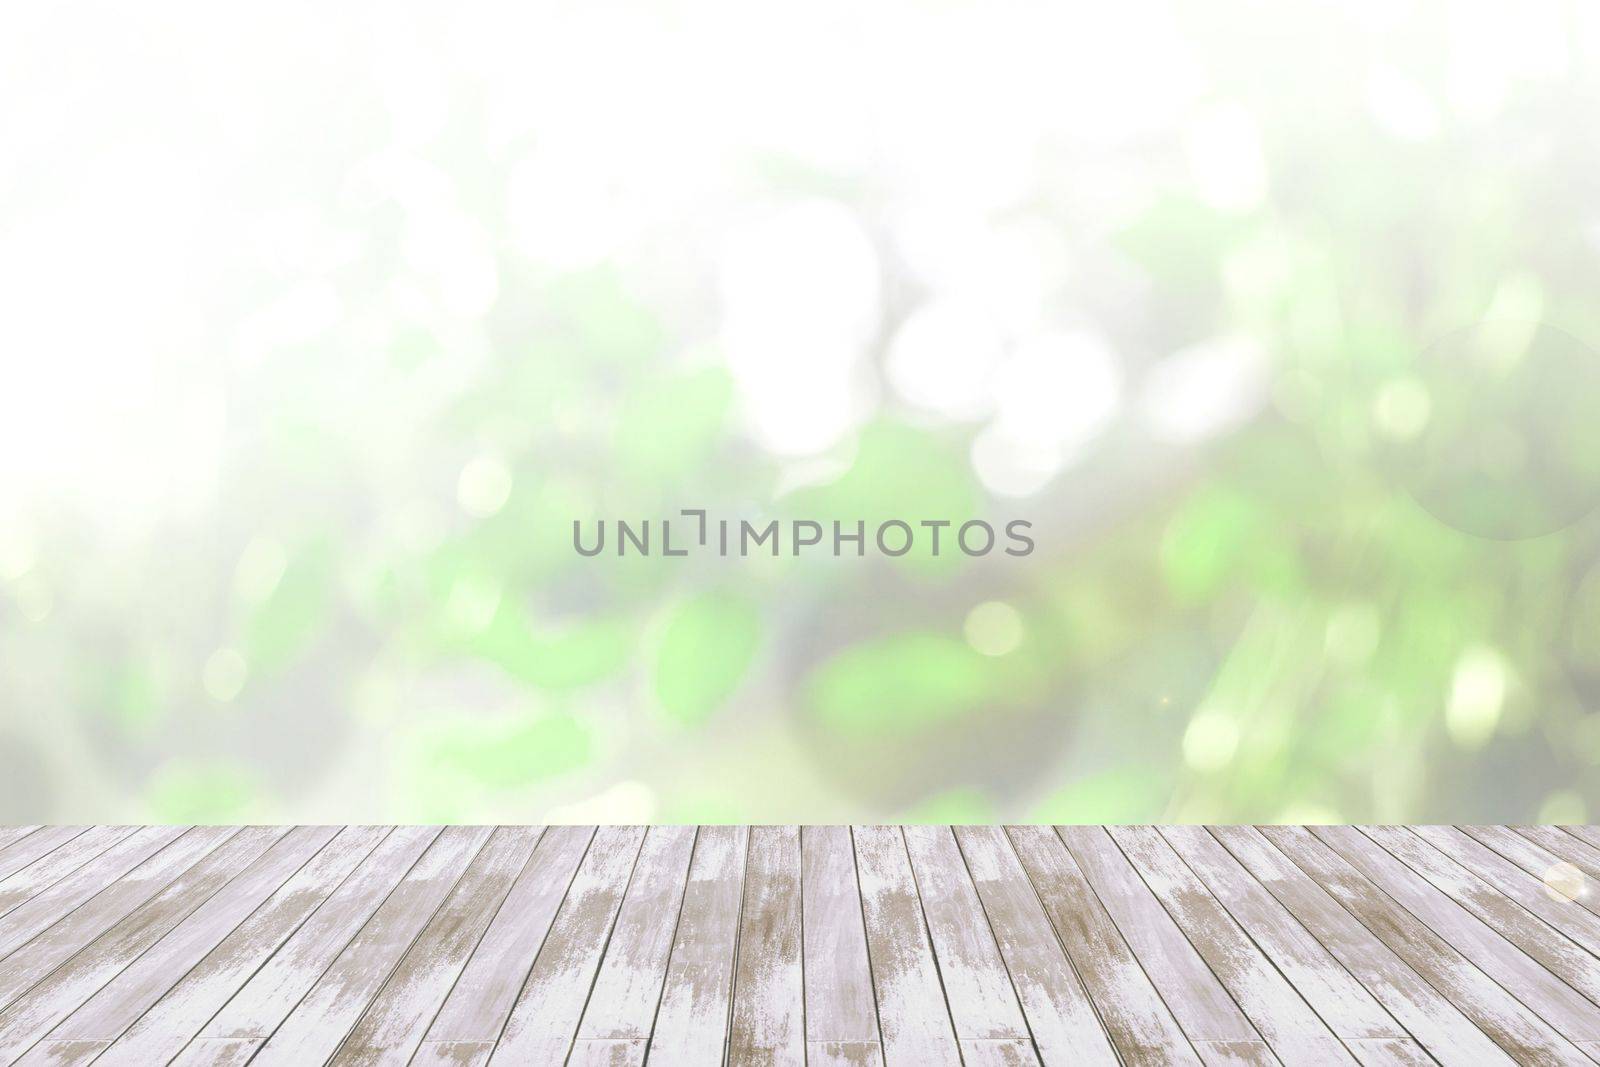 Blurred abstract background of looked-up tree in green tone with wooden floor by rakoptonLPN